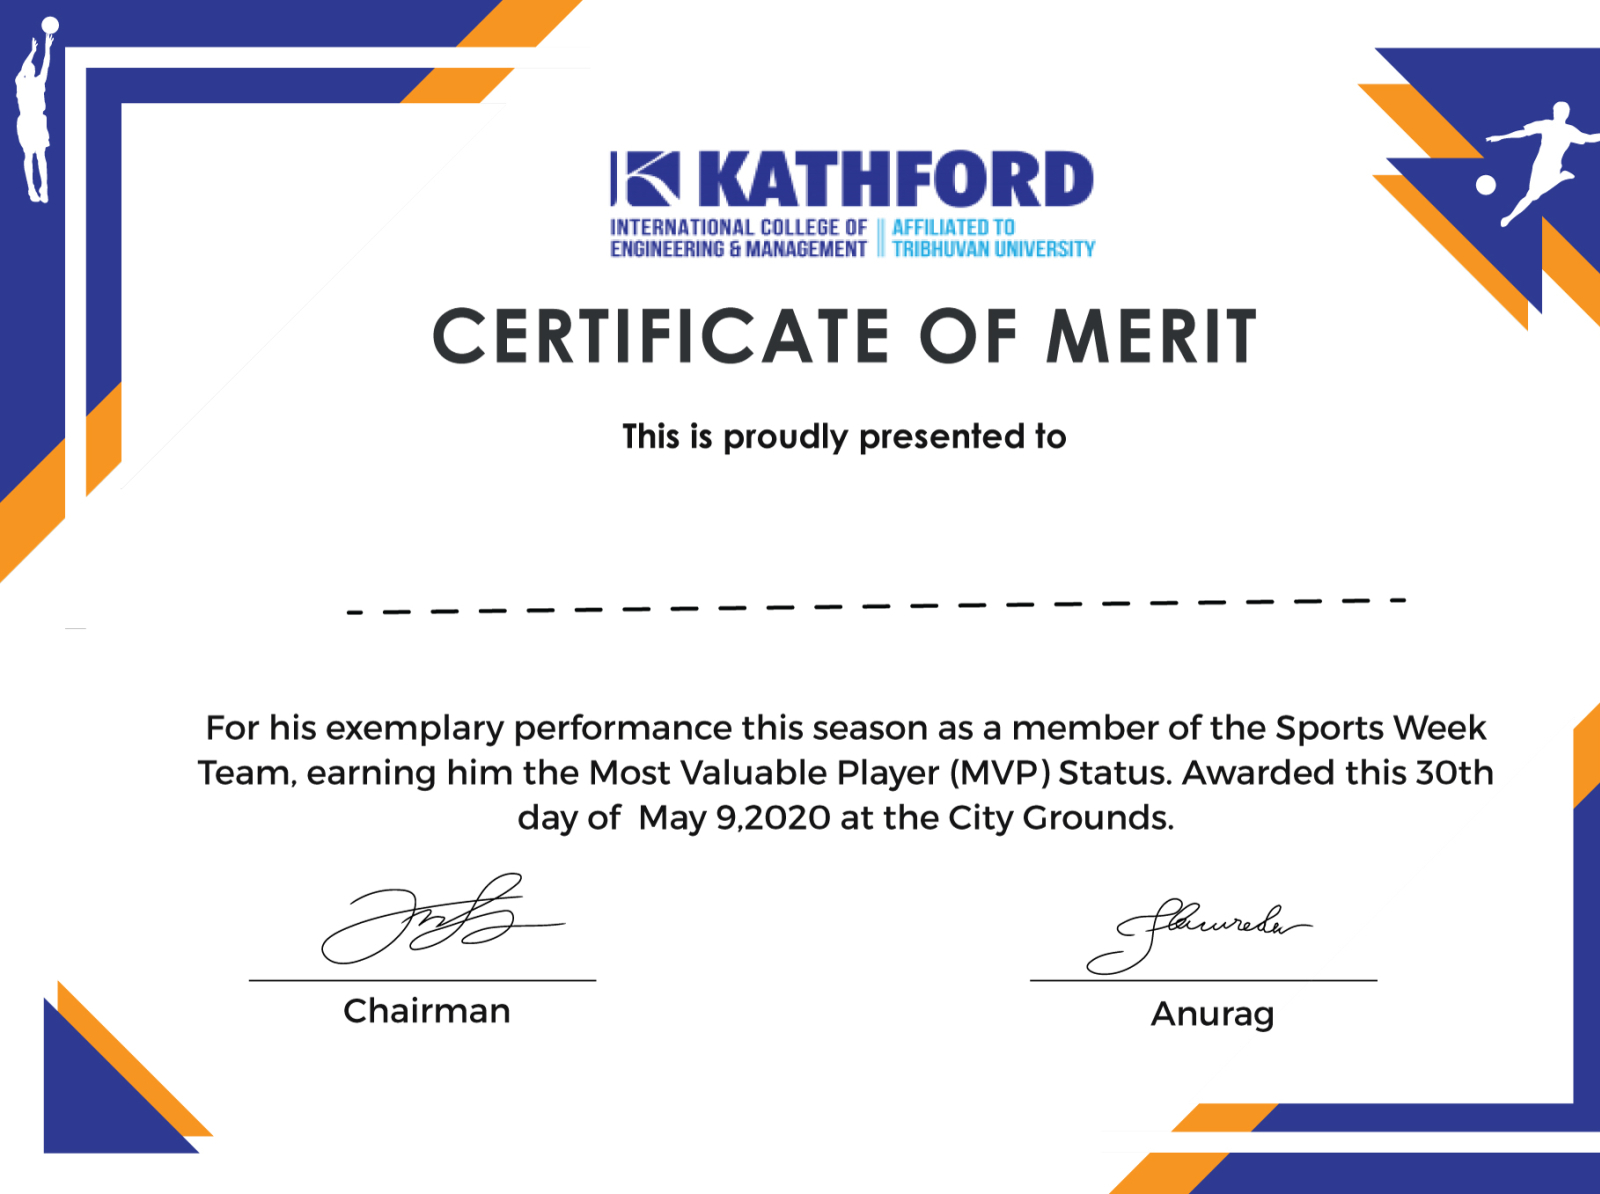 a-simple-sports-certificate-design-by-anurag-dhungana-on-dribbble